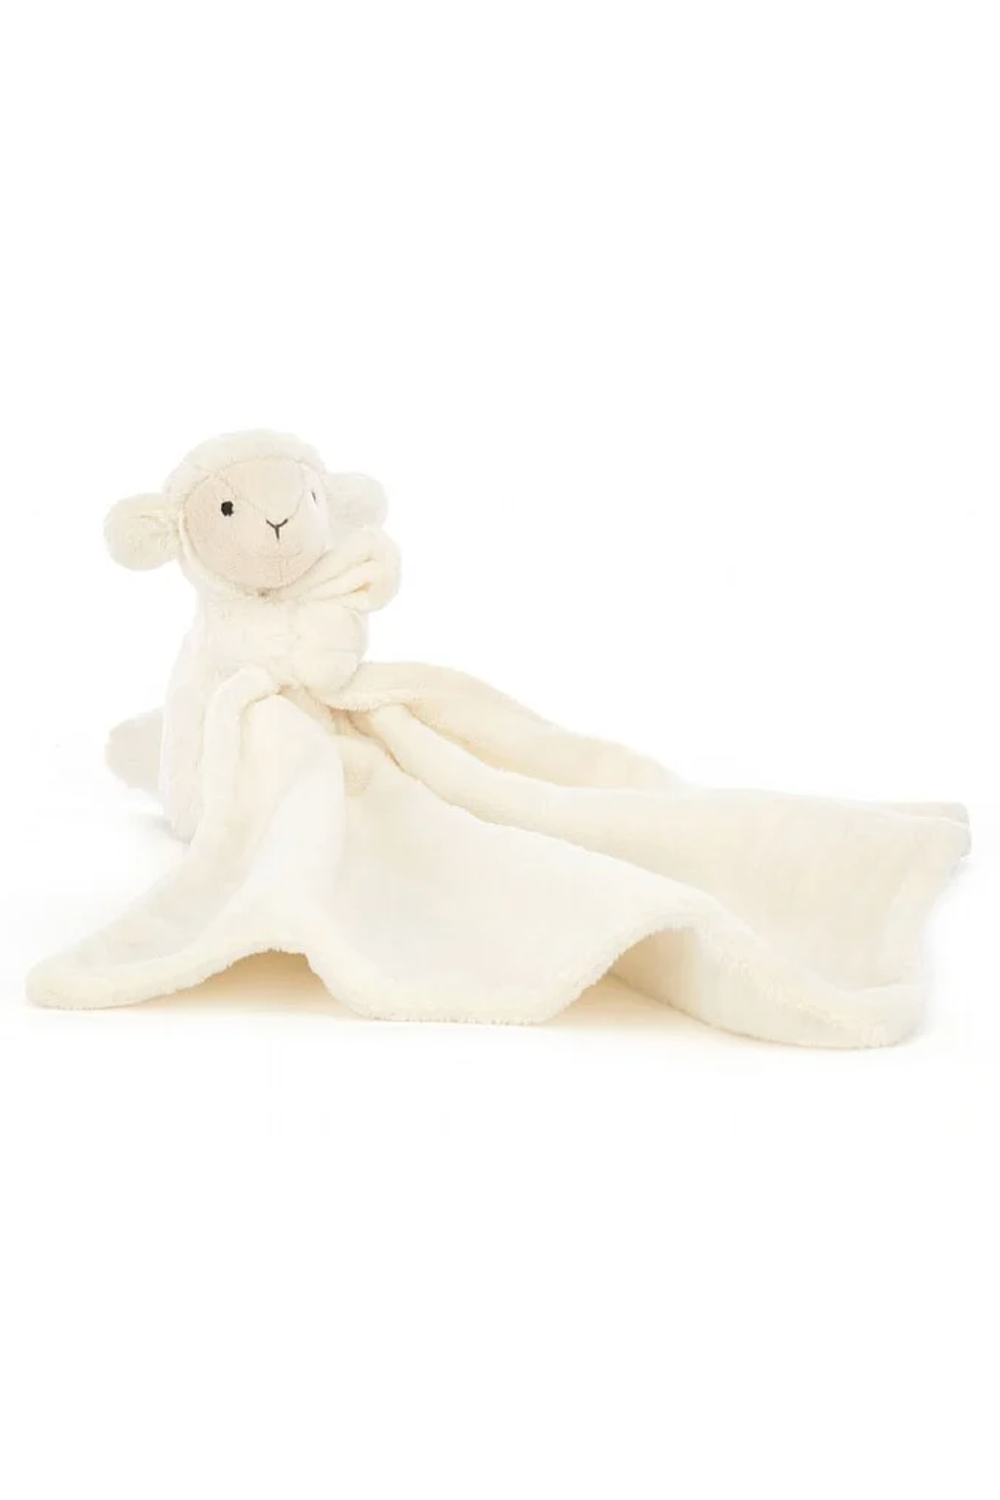 JELLYCAT Bashful Soother - Lamb